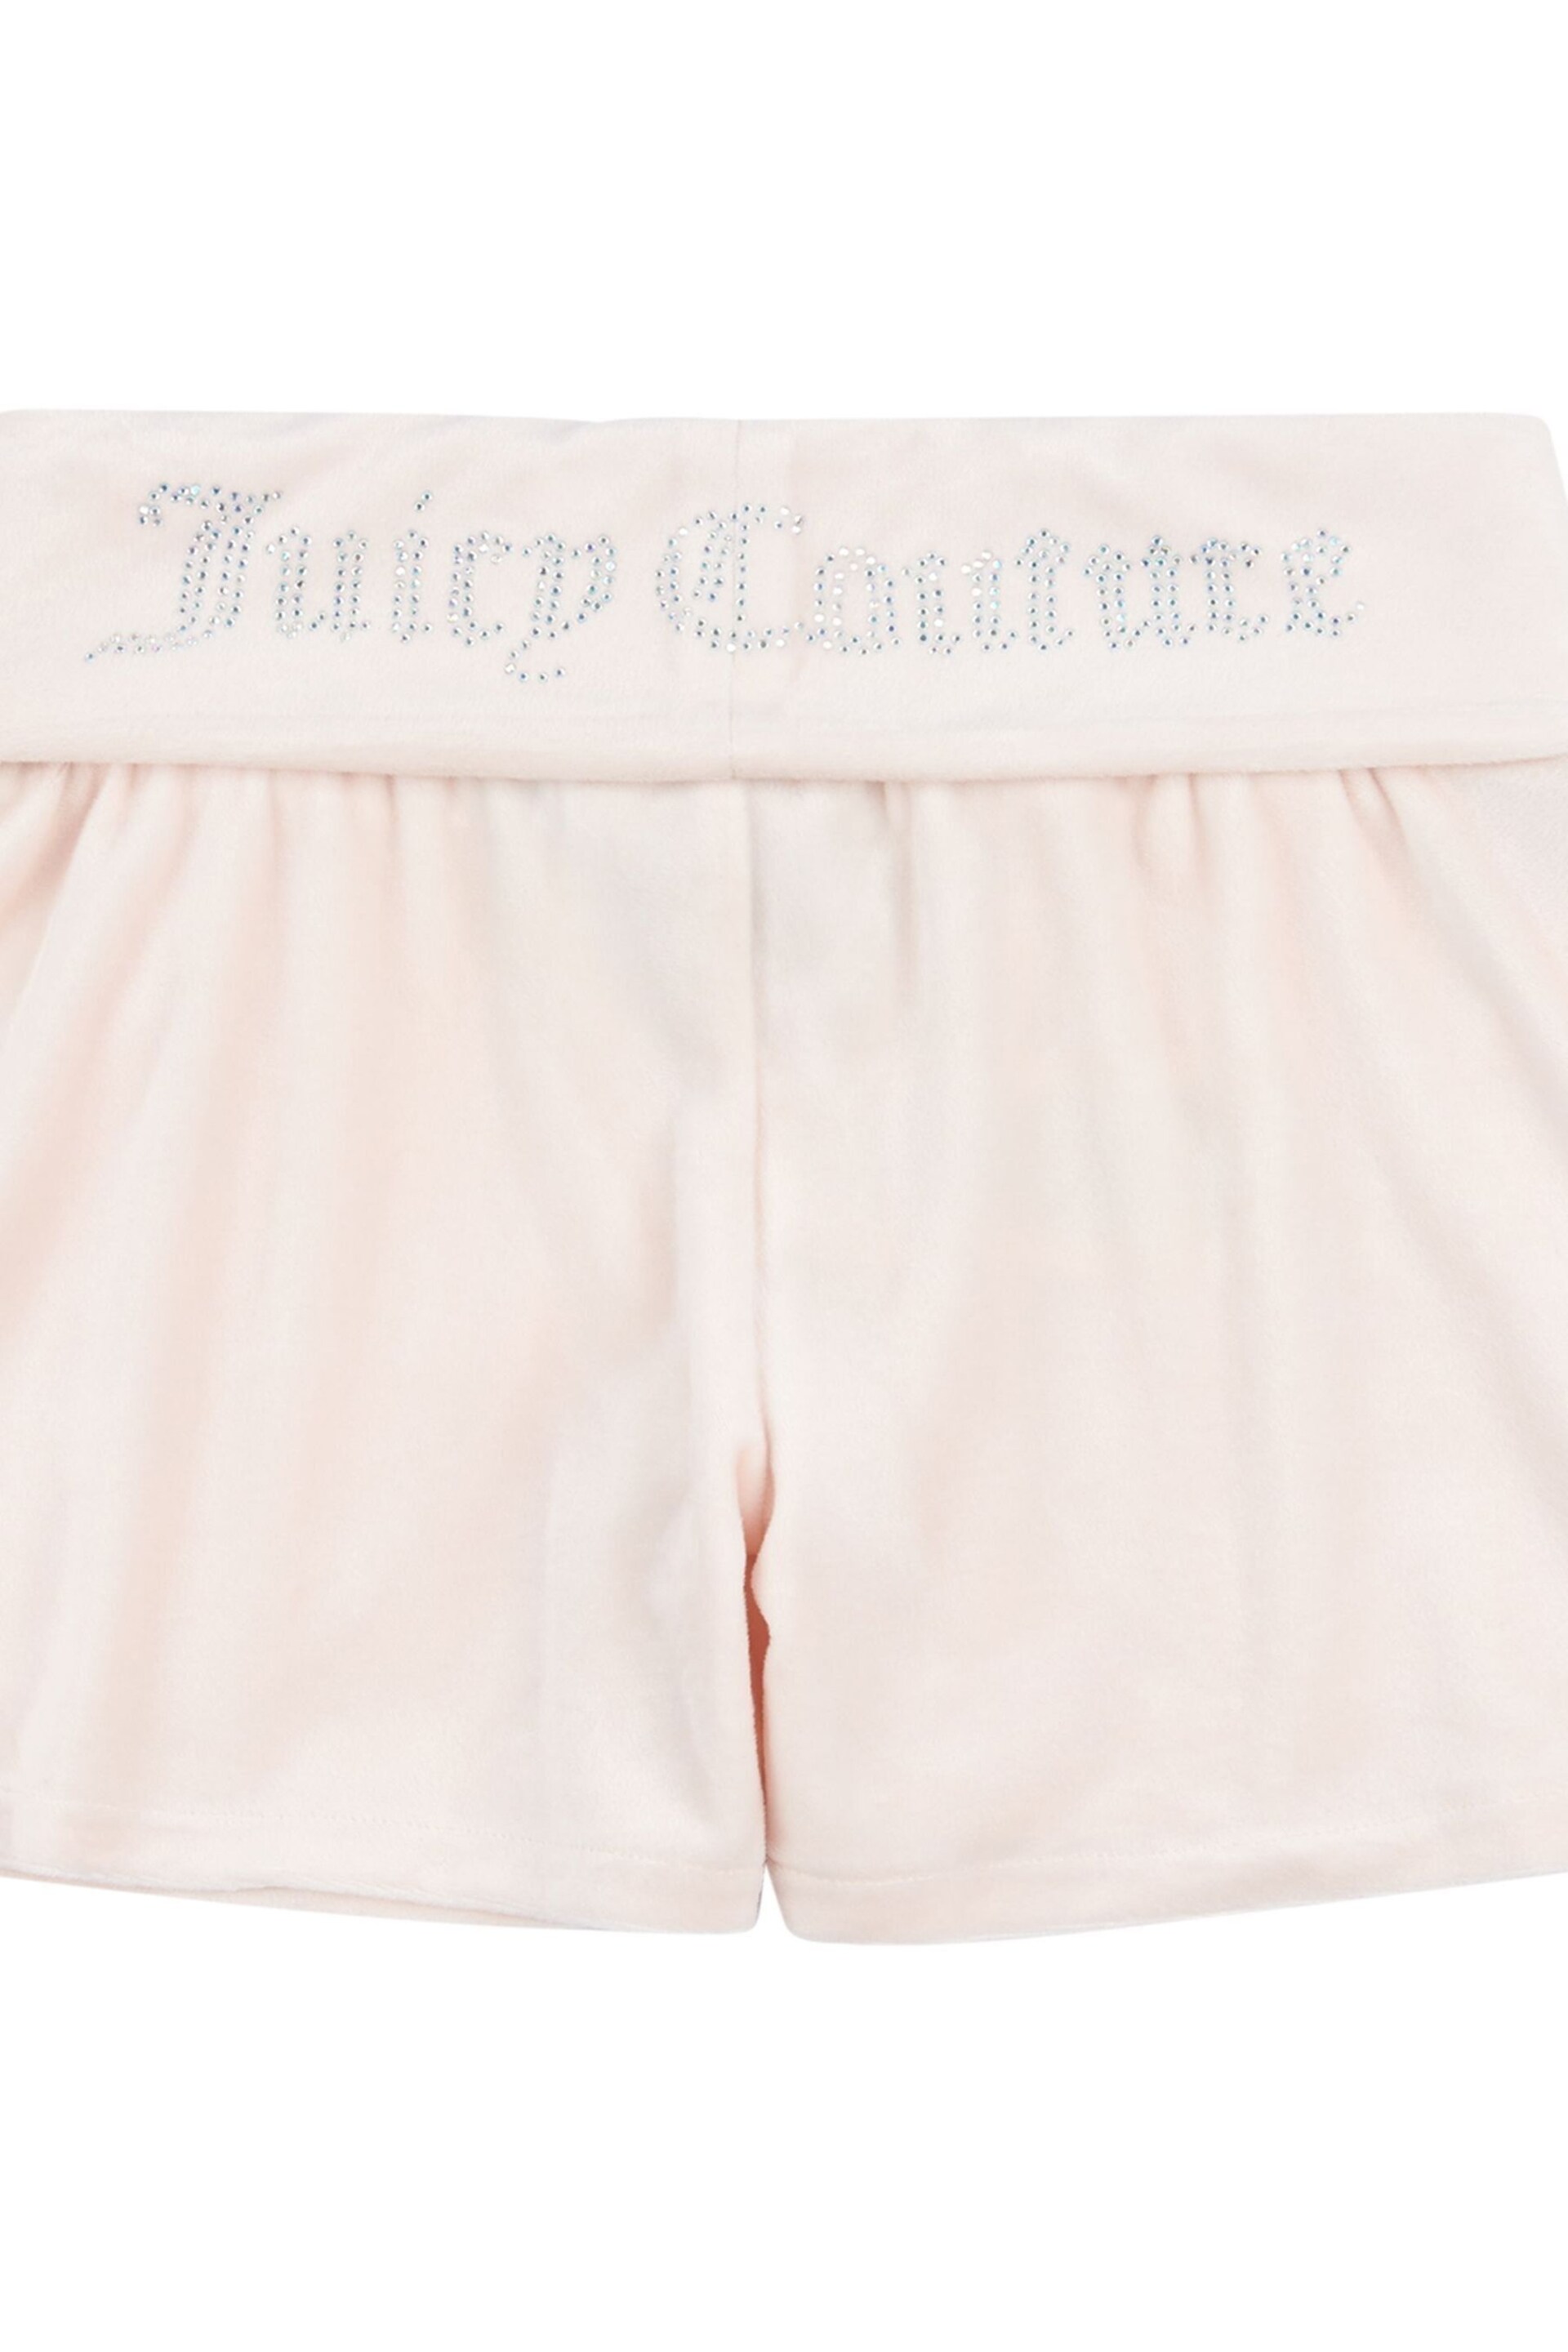 Juicy Couture Girls Deep Waistband Low Rise Pink Shorts - Image 8 of 10